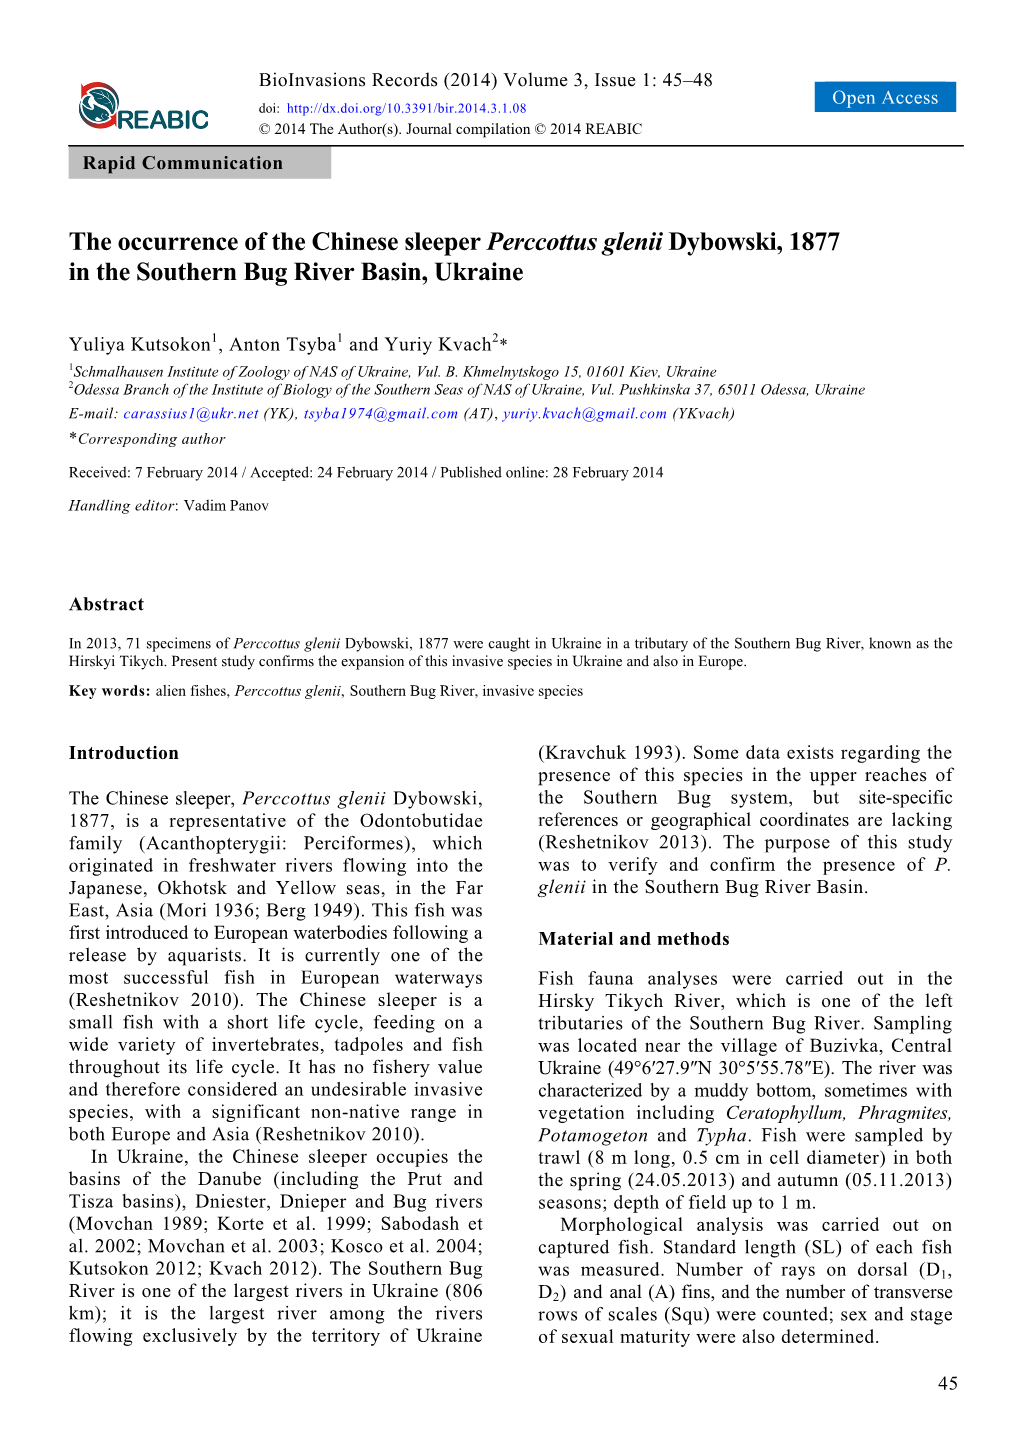 The Occurrence of the Chinese Sleeper Perccottus Glenii Dybowski, 1877 in the Southern Bug River Basin, Ukraine